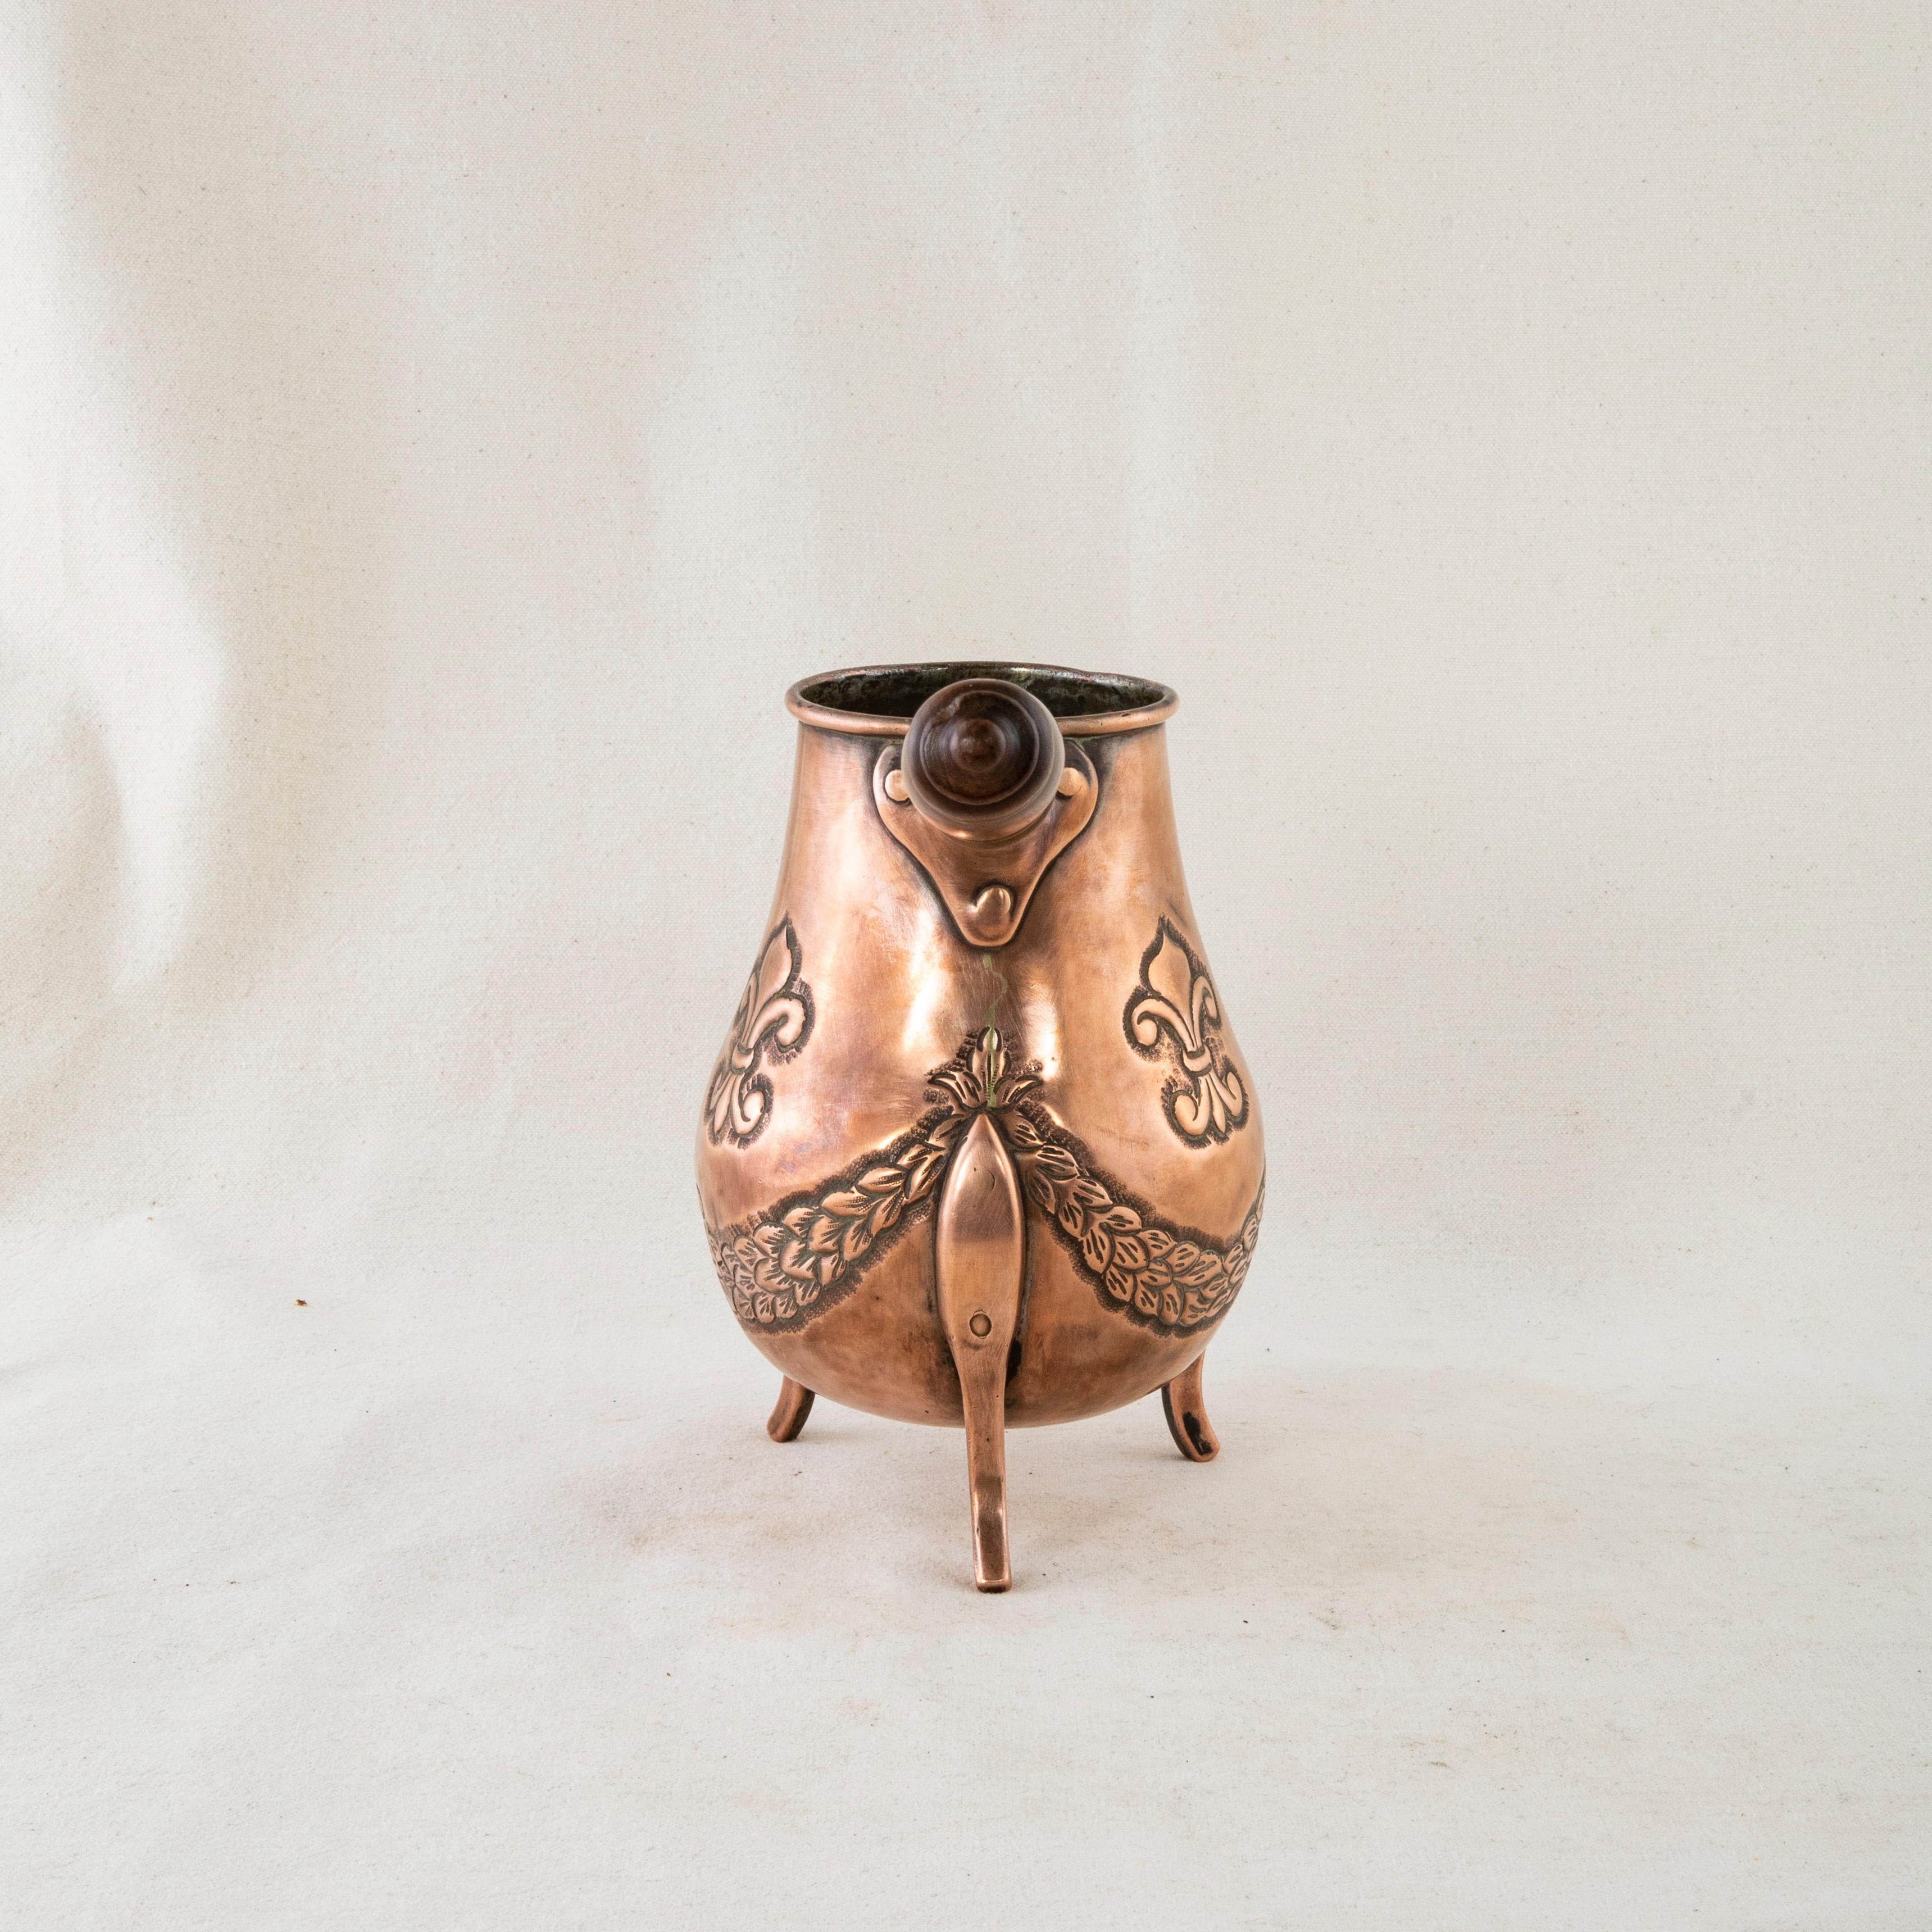 Repoussé Early 19th Century French Copper Repousse Chocolate Pot from a French Chateau